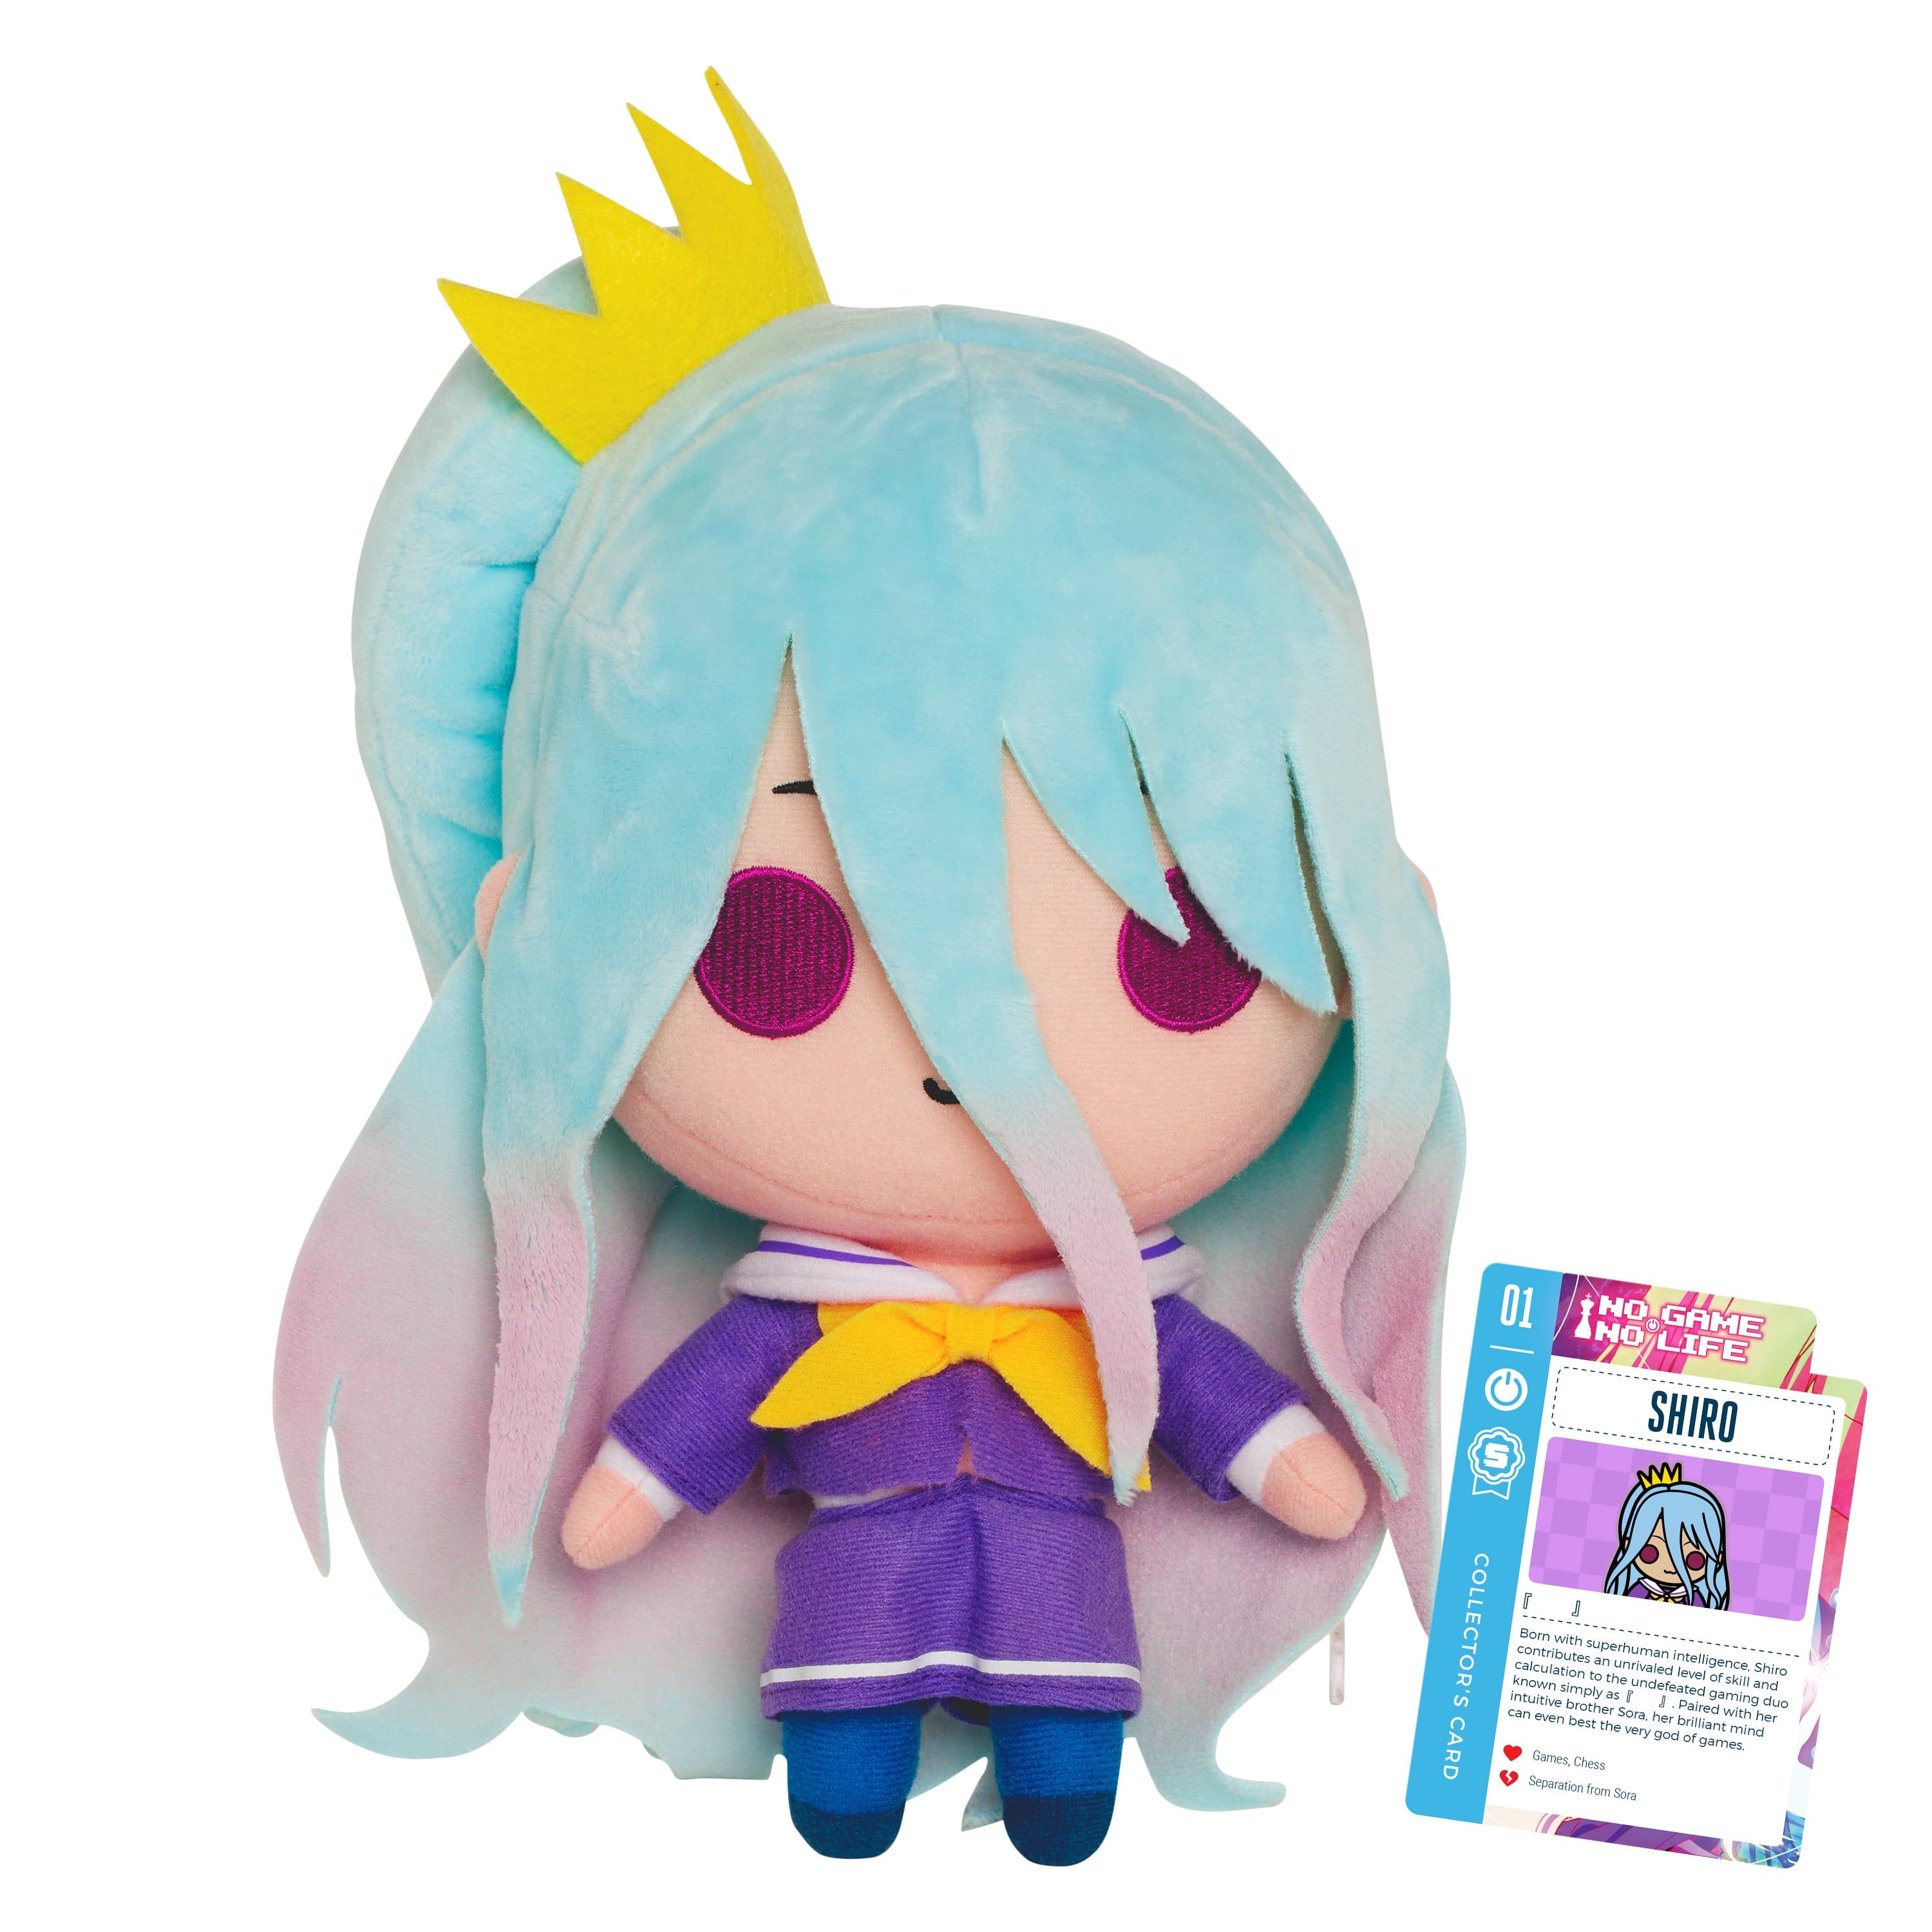 No Game No Life - 10" Shiro Collector's Stuffed Plush Toy With Collector's Card